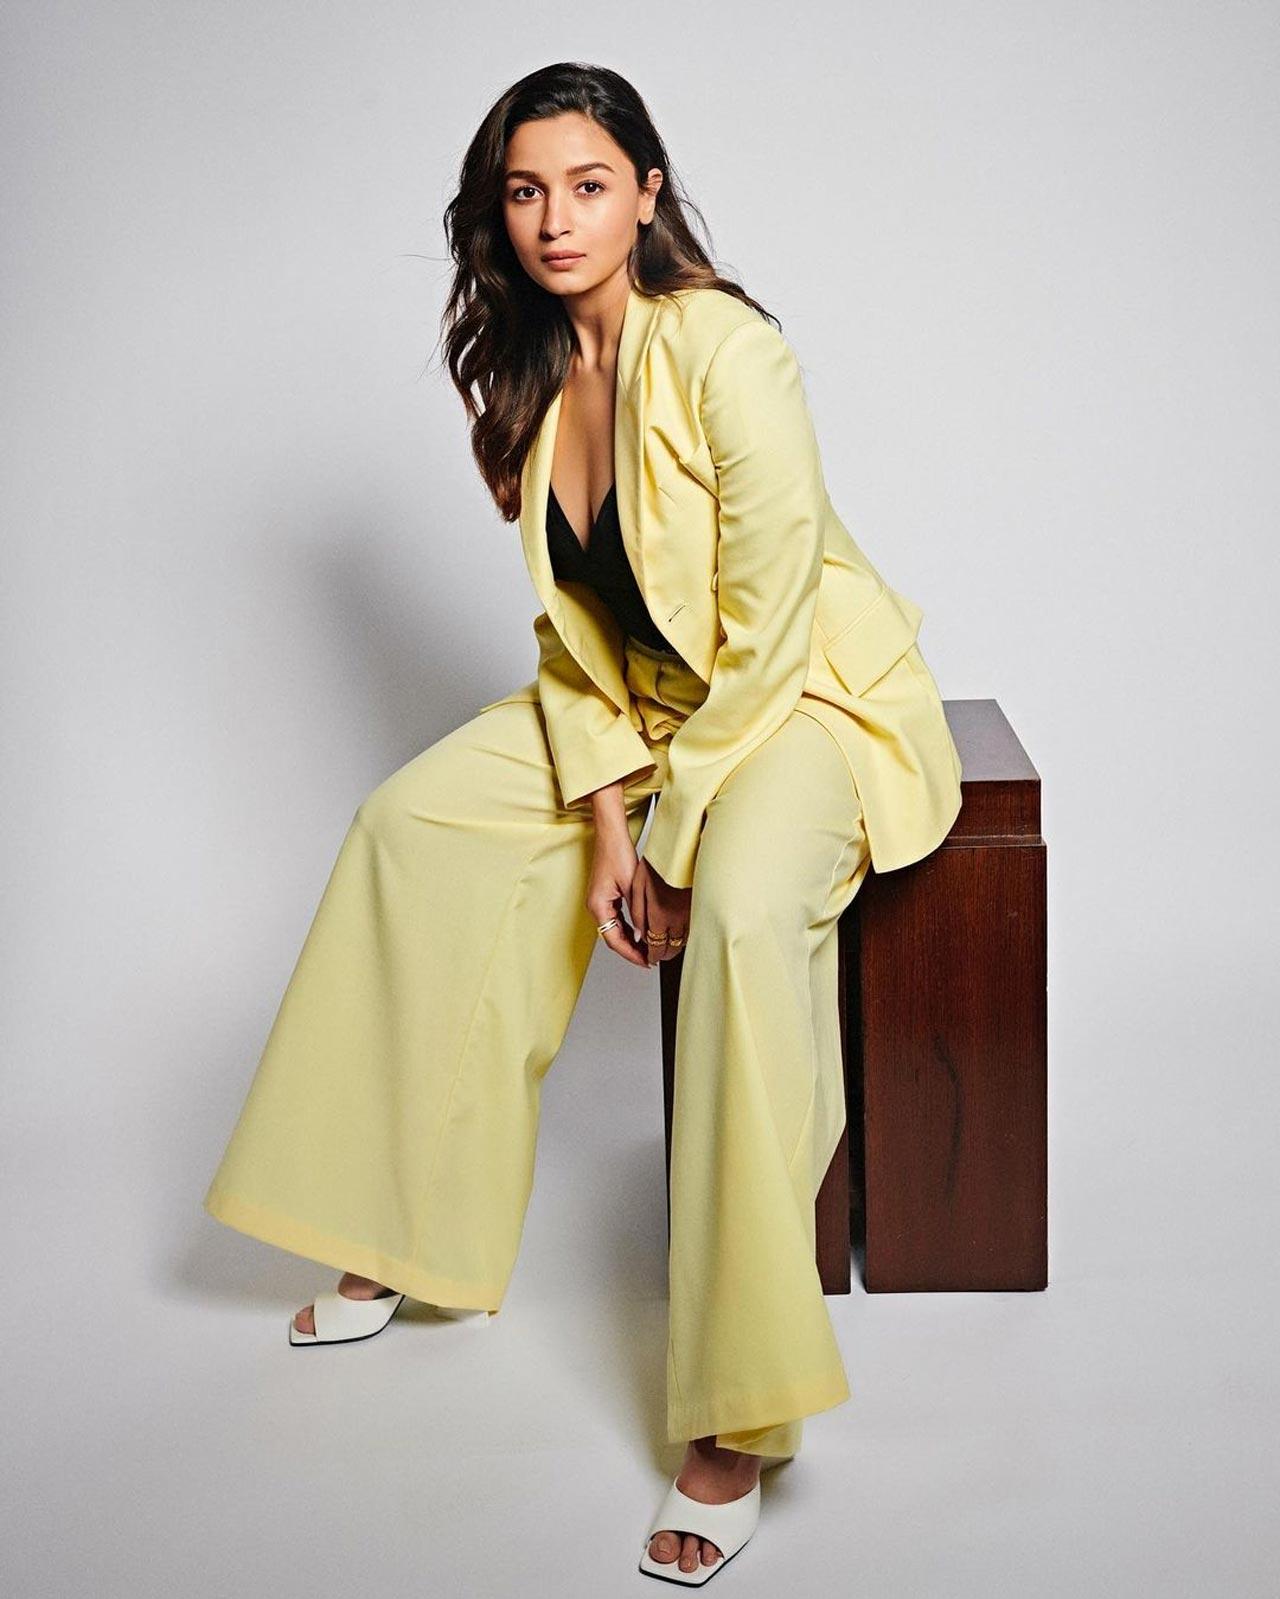 While we wait for the movie and her fashionable appearances in the days to come, let's take a look at the pictures that the mom-to-be shared on Instagram. Looking chic in a yellow pantsuit, Alia has posted some pictures from a photo shoot. She wrote, 